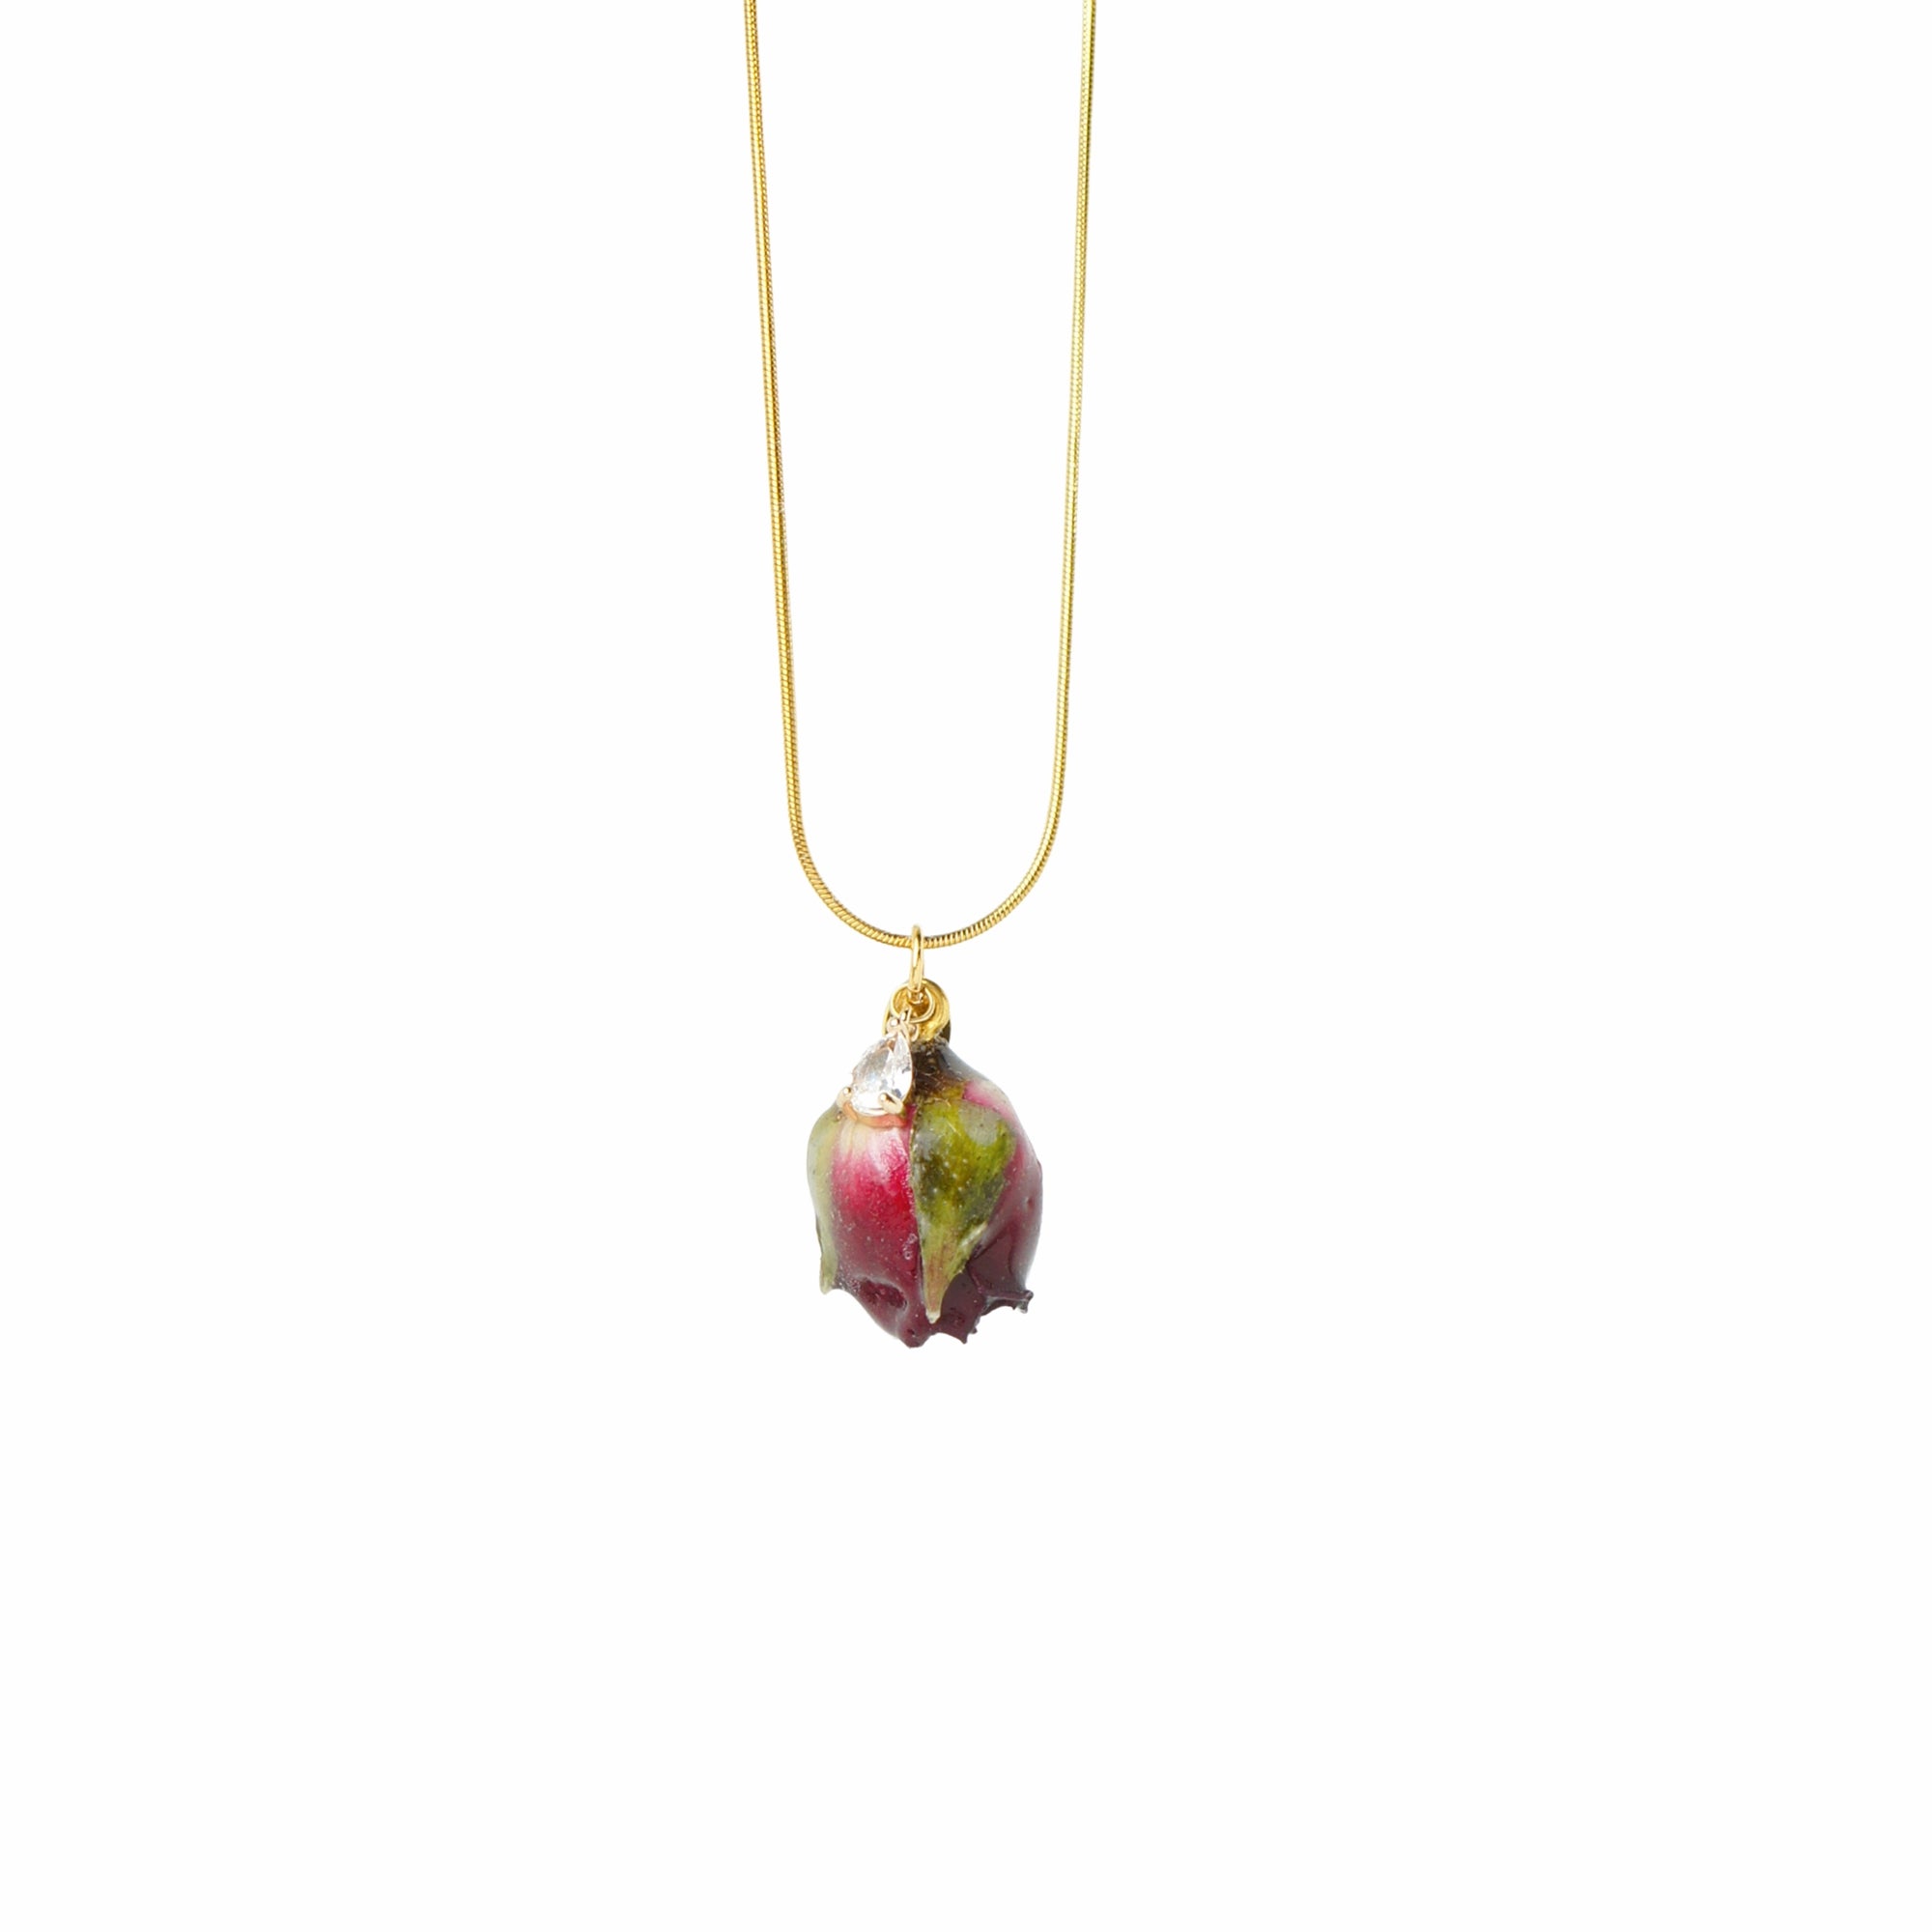 *REAL FLOWER* Grande Amore Rosebud and Crystal Charm Necklace